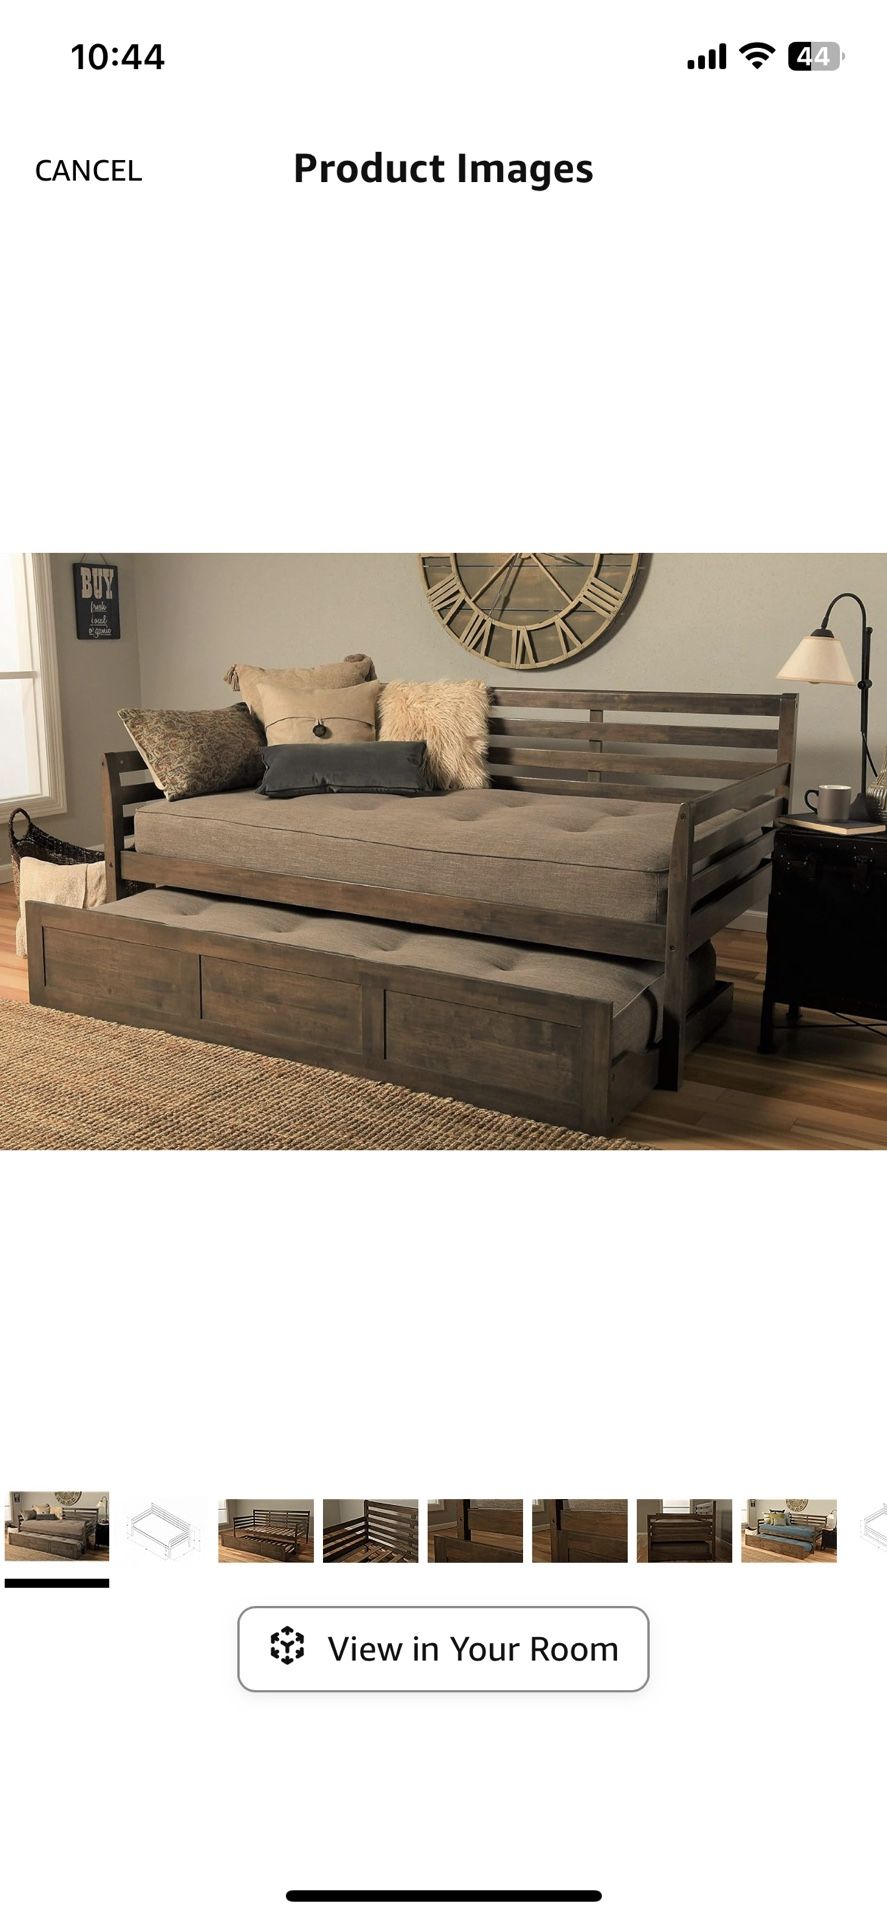 Traditional Twin-Size Solid Wood Daybed Walnut Finish